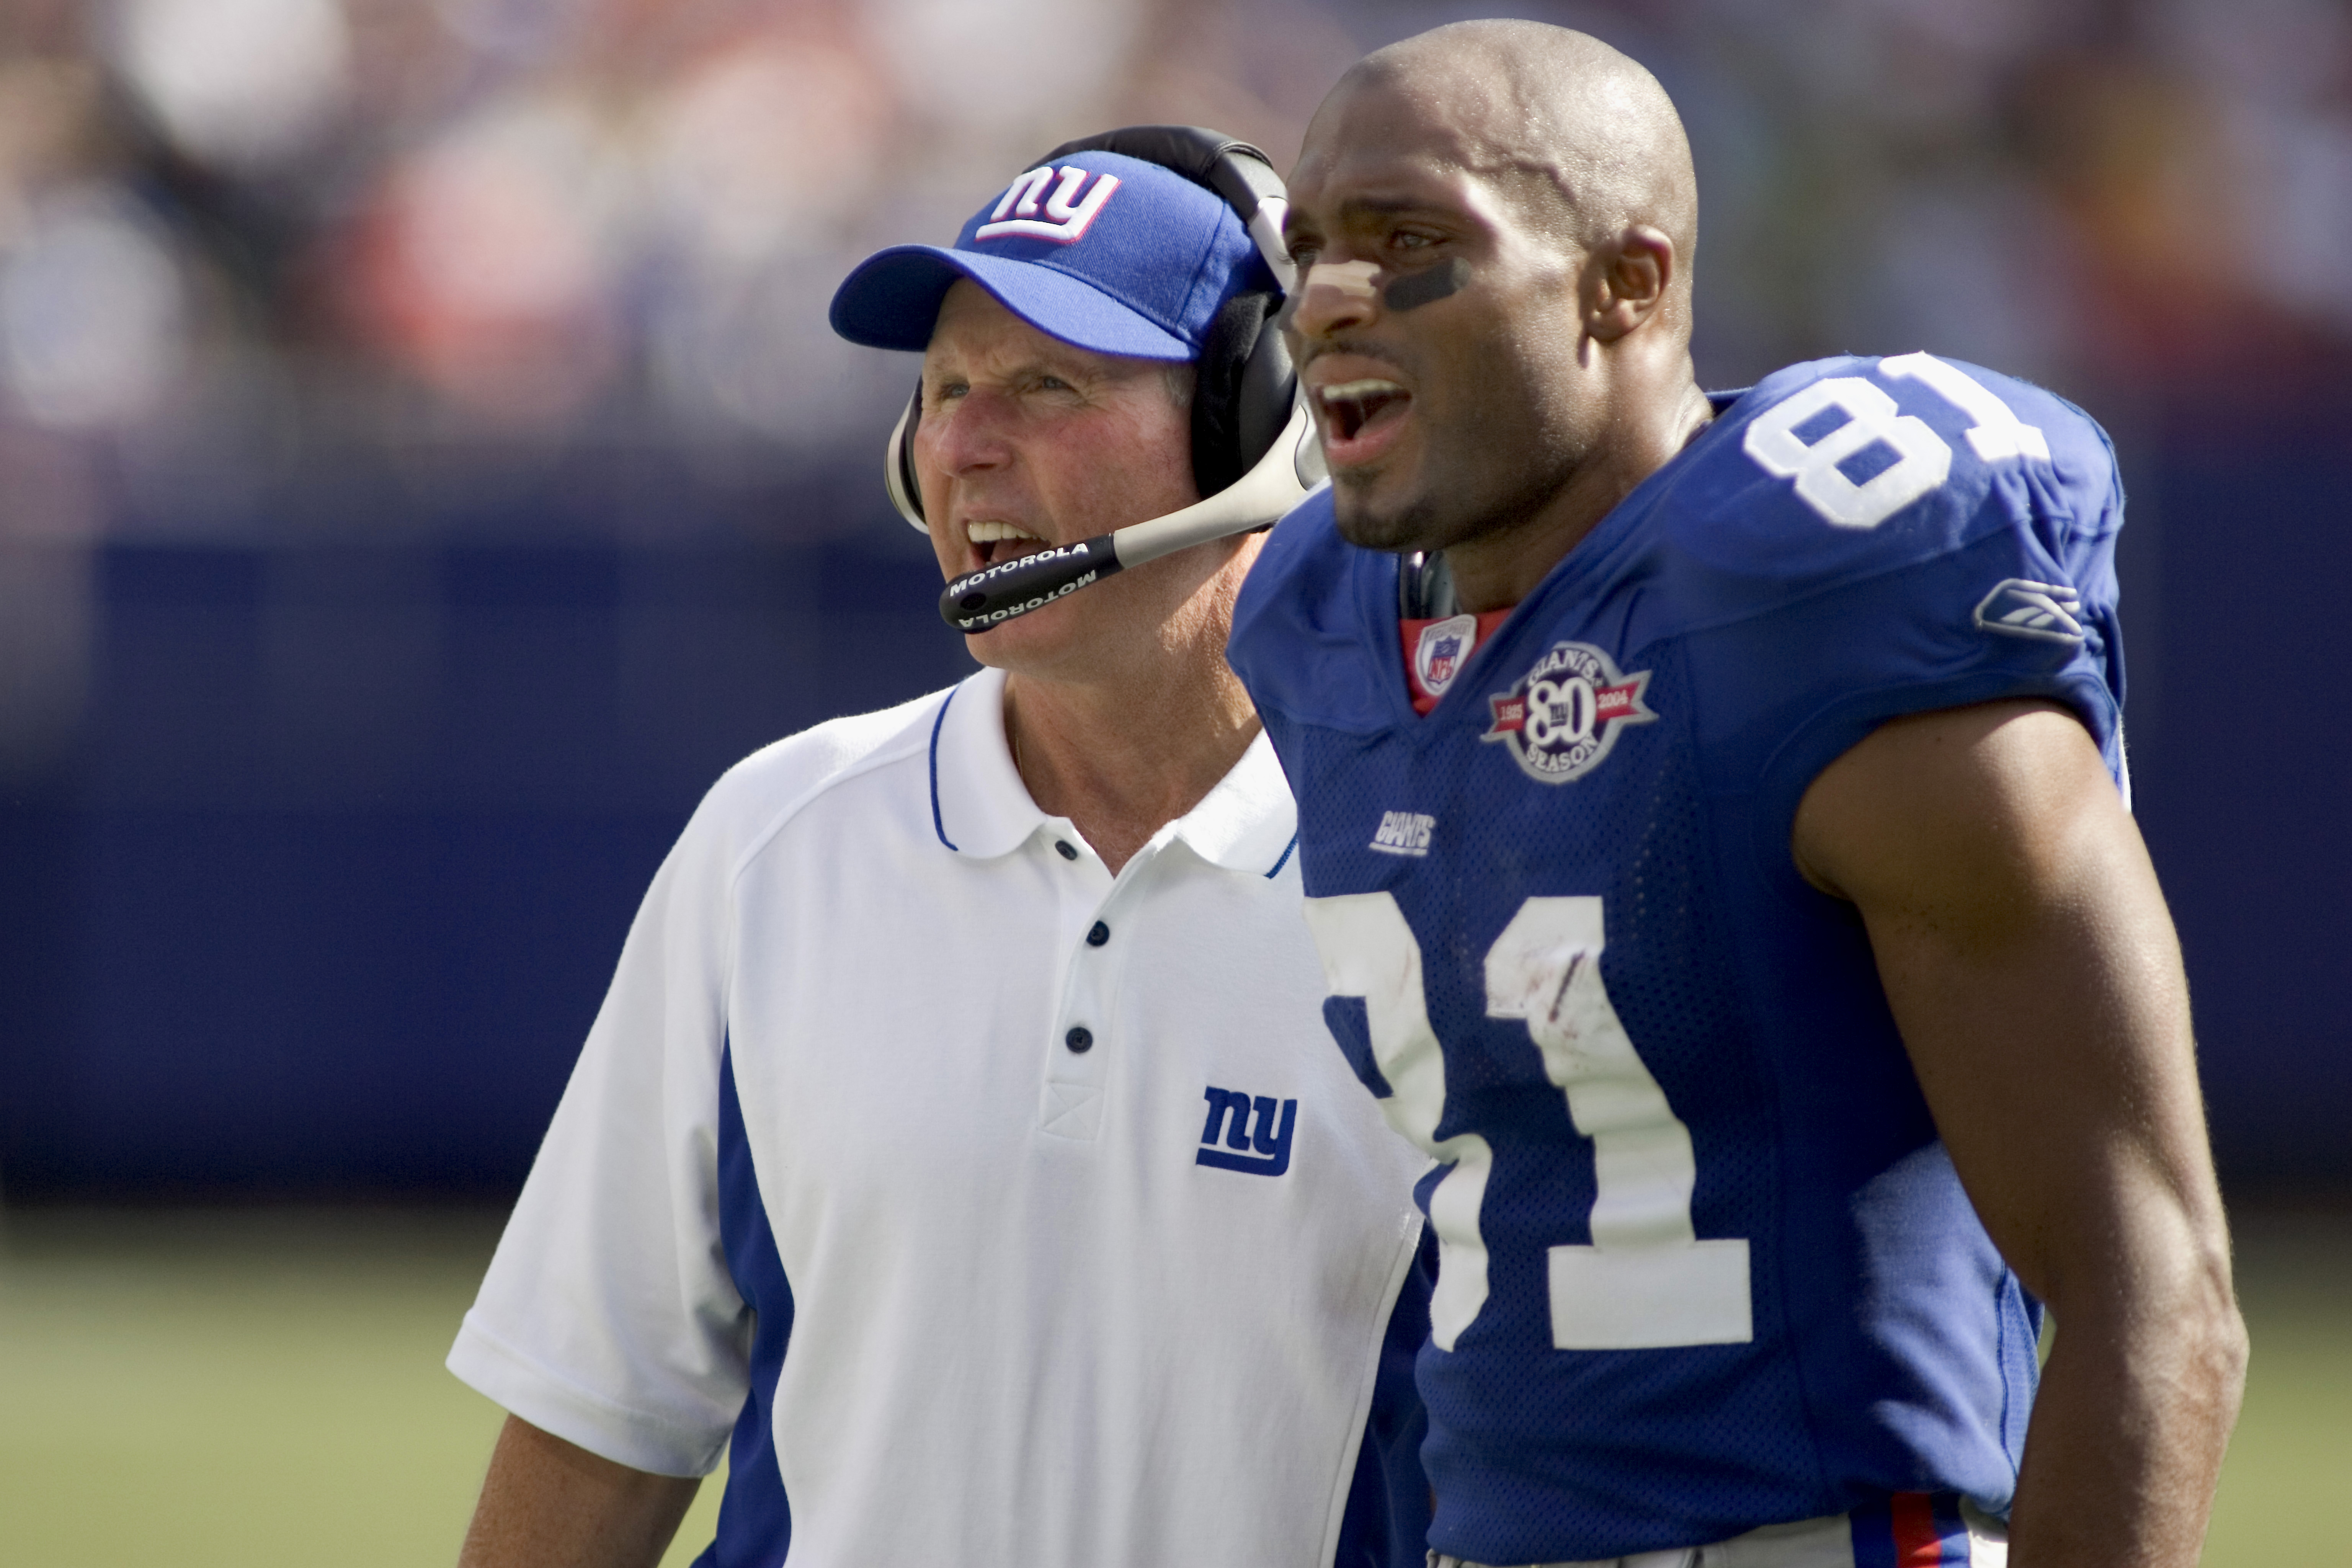 New York Giants wide receiver Amani Toomer talks to Tom Coughlin